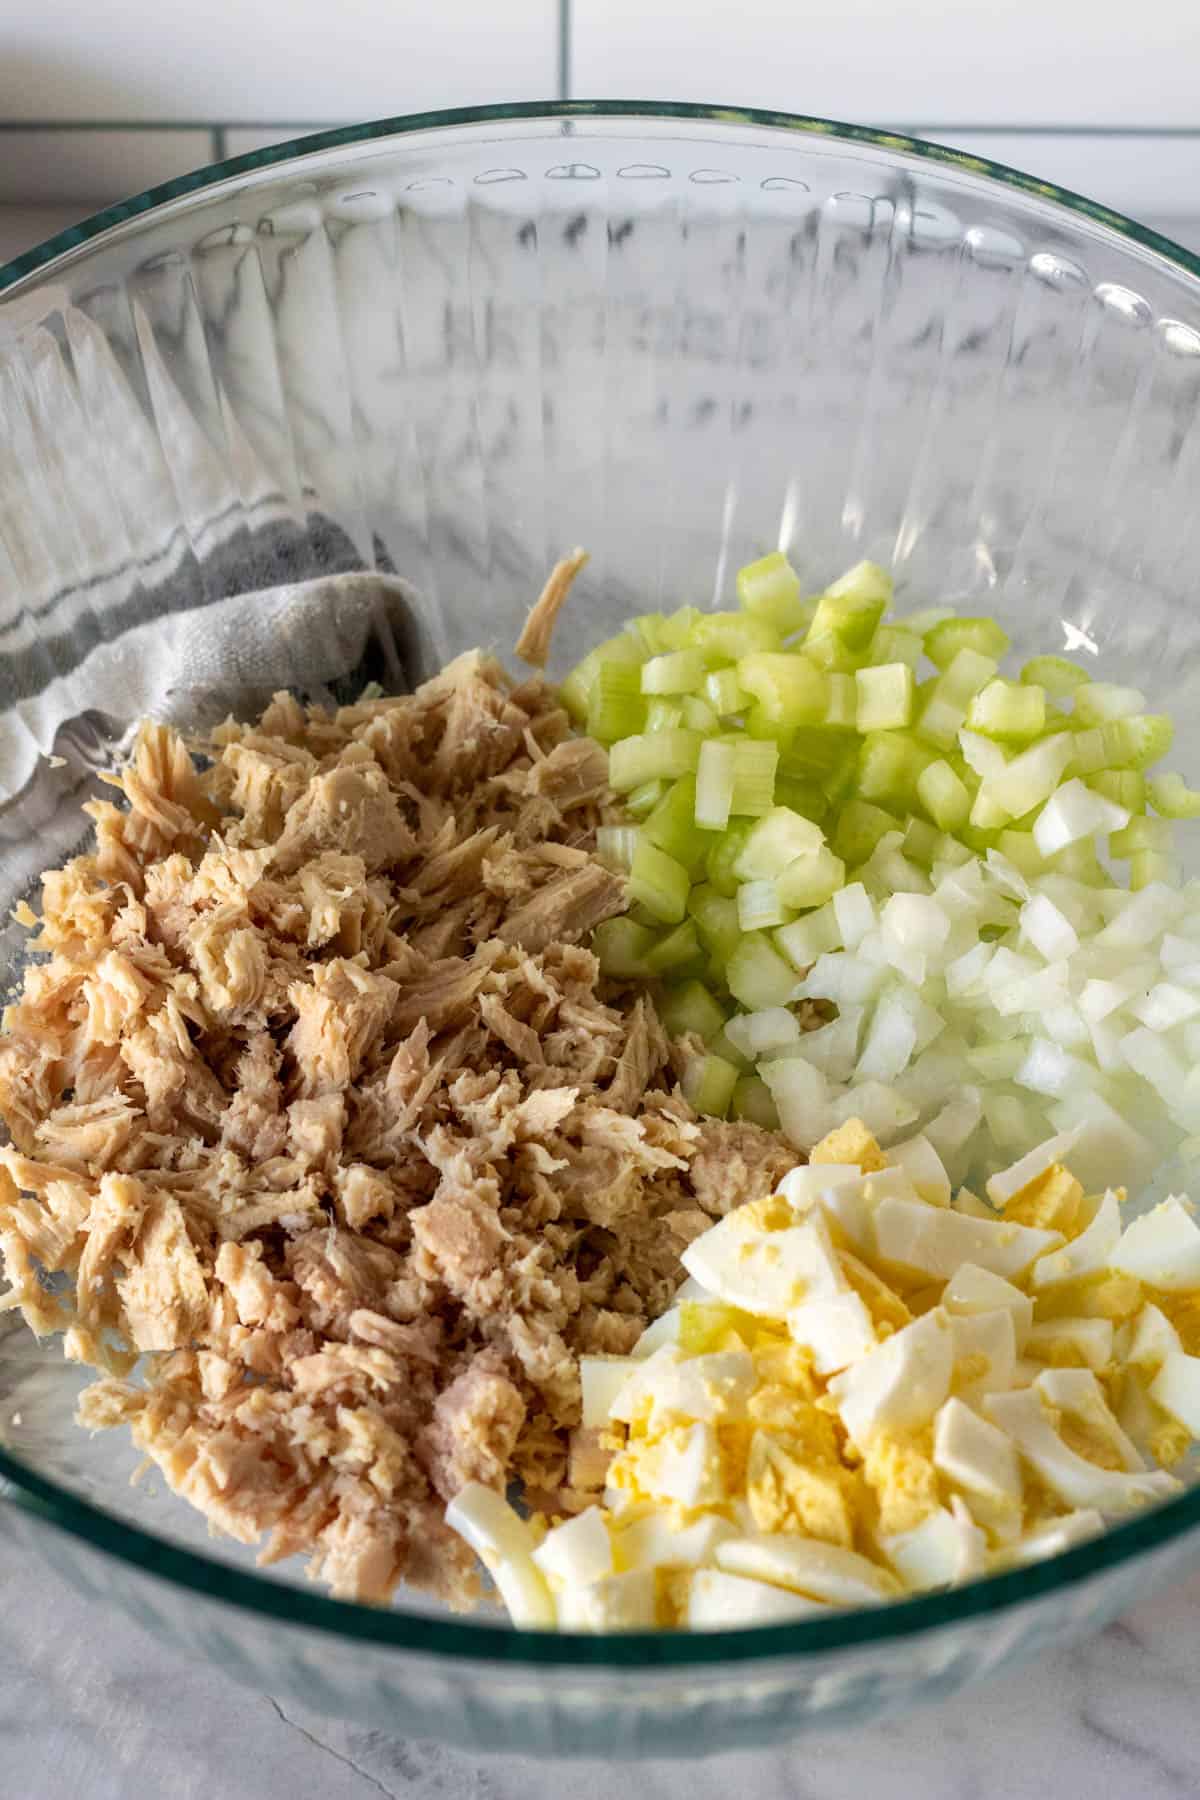 Tuna, celery, onion and hard boiled egg in mixing bowl.